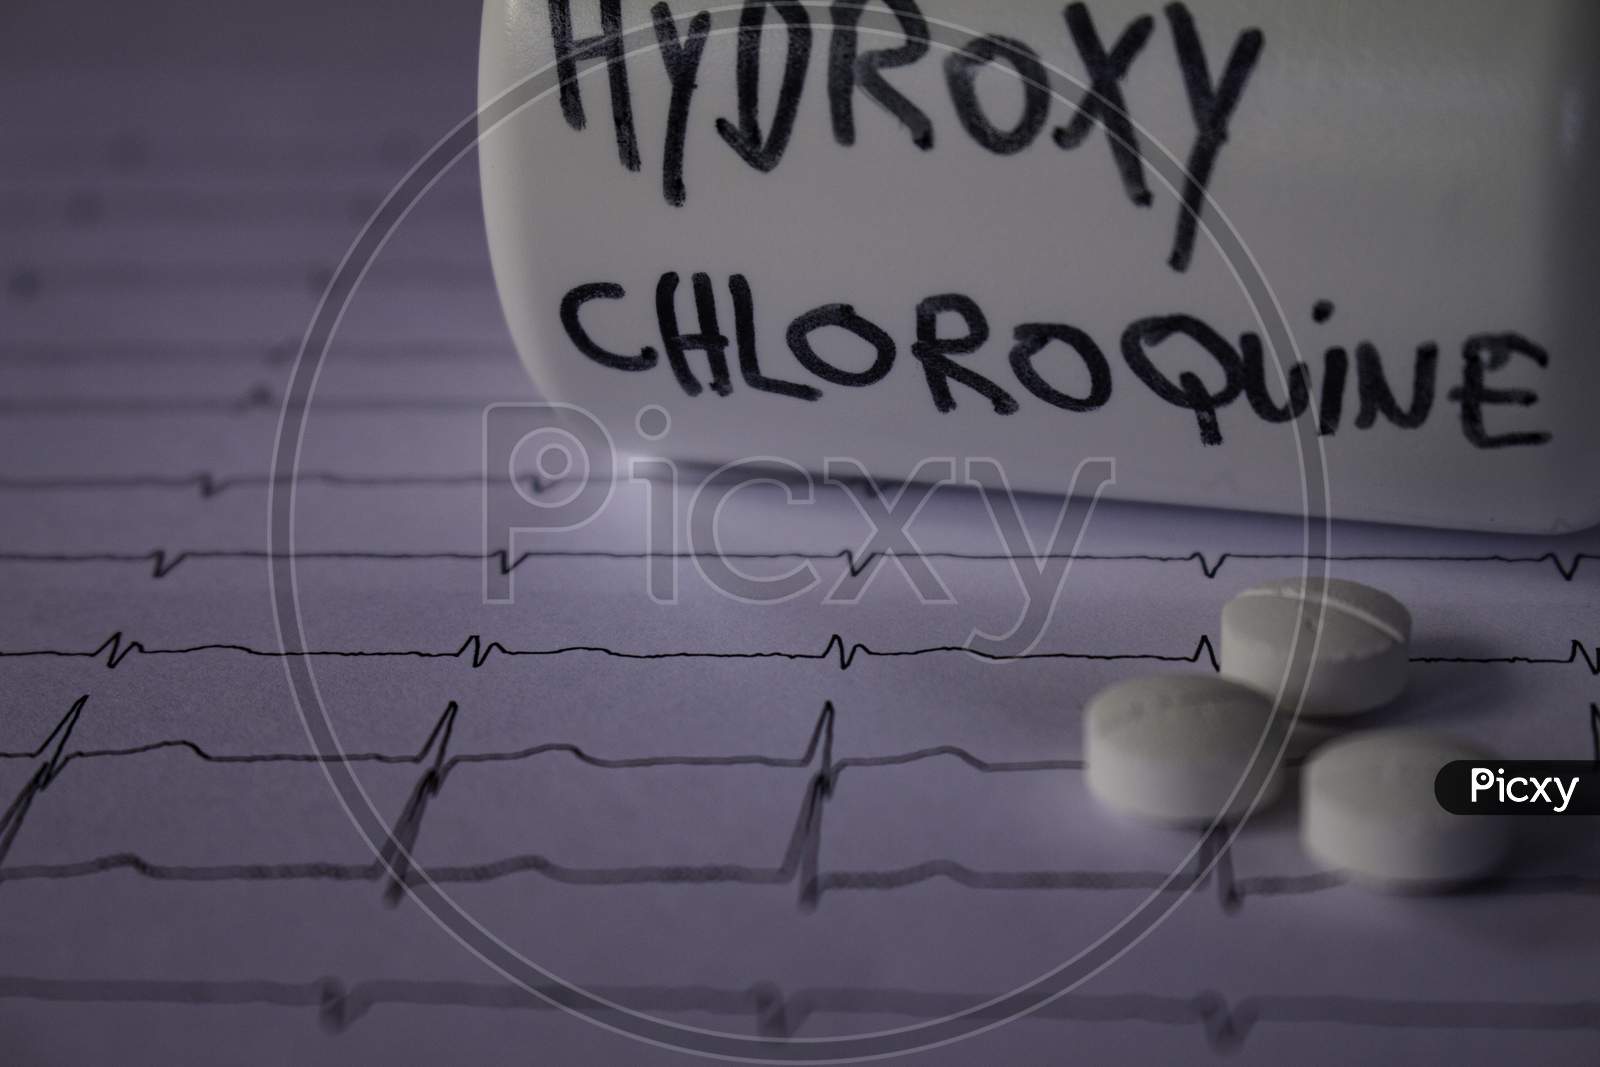 Adverse Effects On The Heart By Hydroxychloroquine Or Chloroquine. Pills On An Electrocardiogram. White Container With "Hydroxychloroquine" Written On The Side.